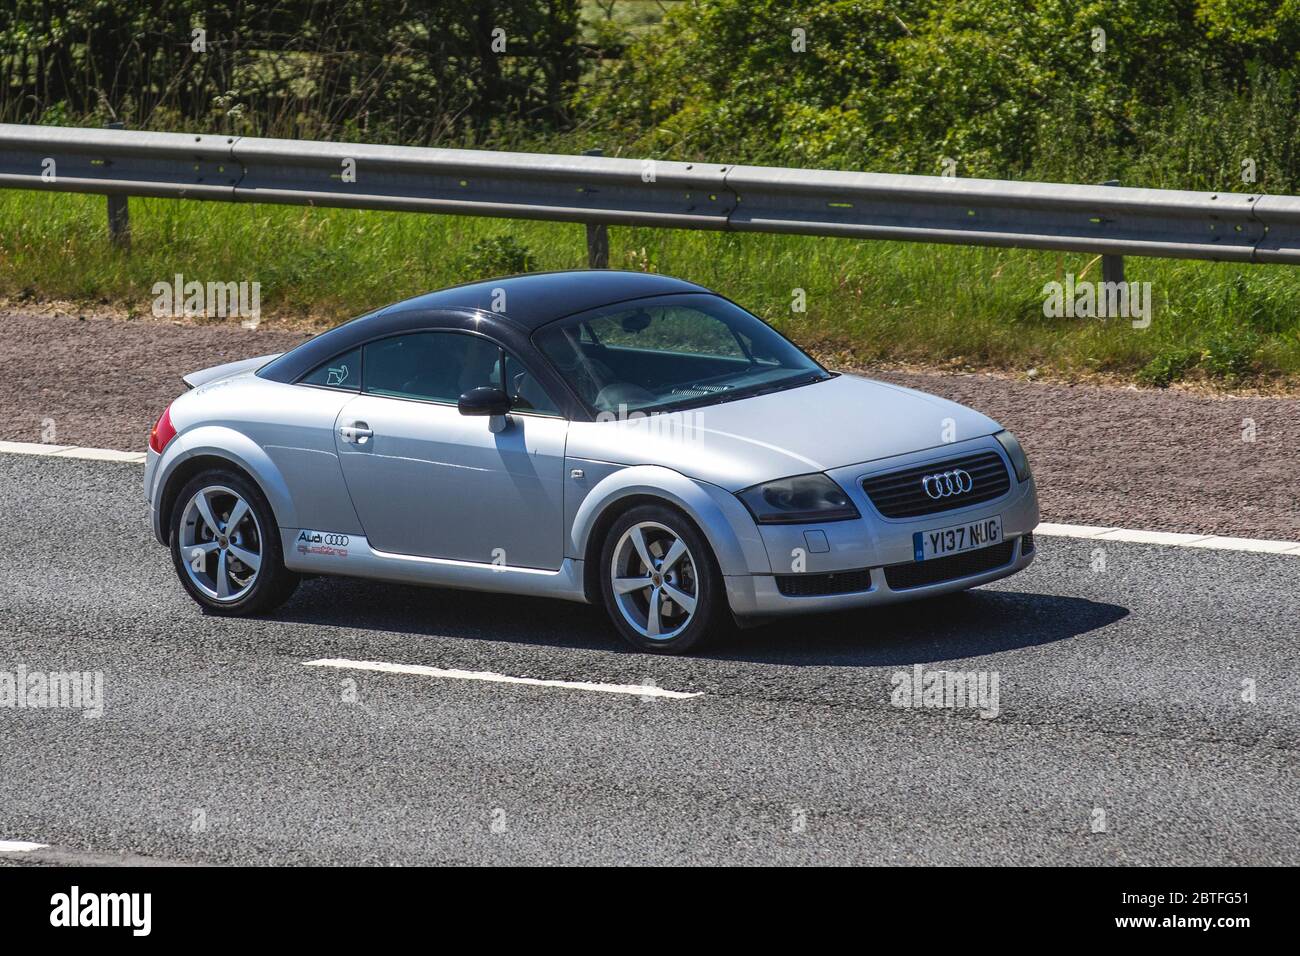 Audi Tt Quattro High Resolution Stock Photography And Images Alamy